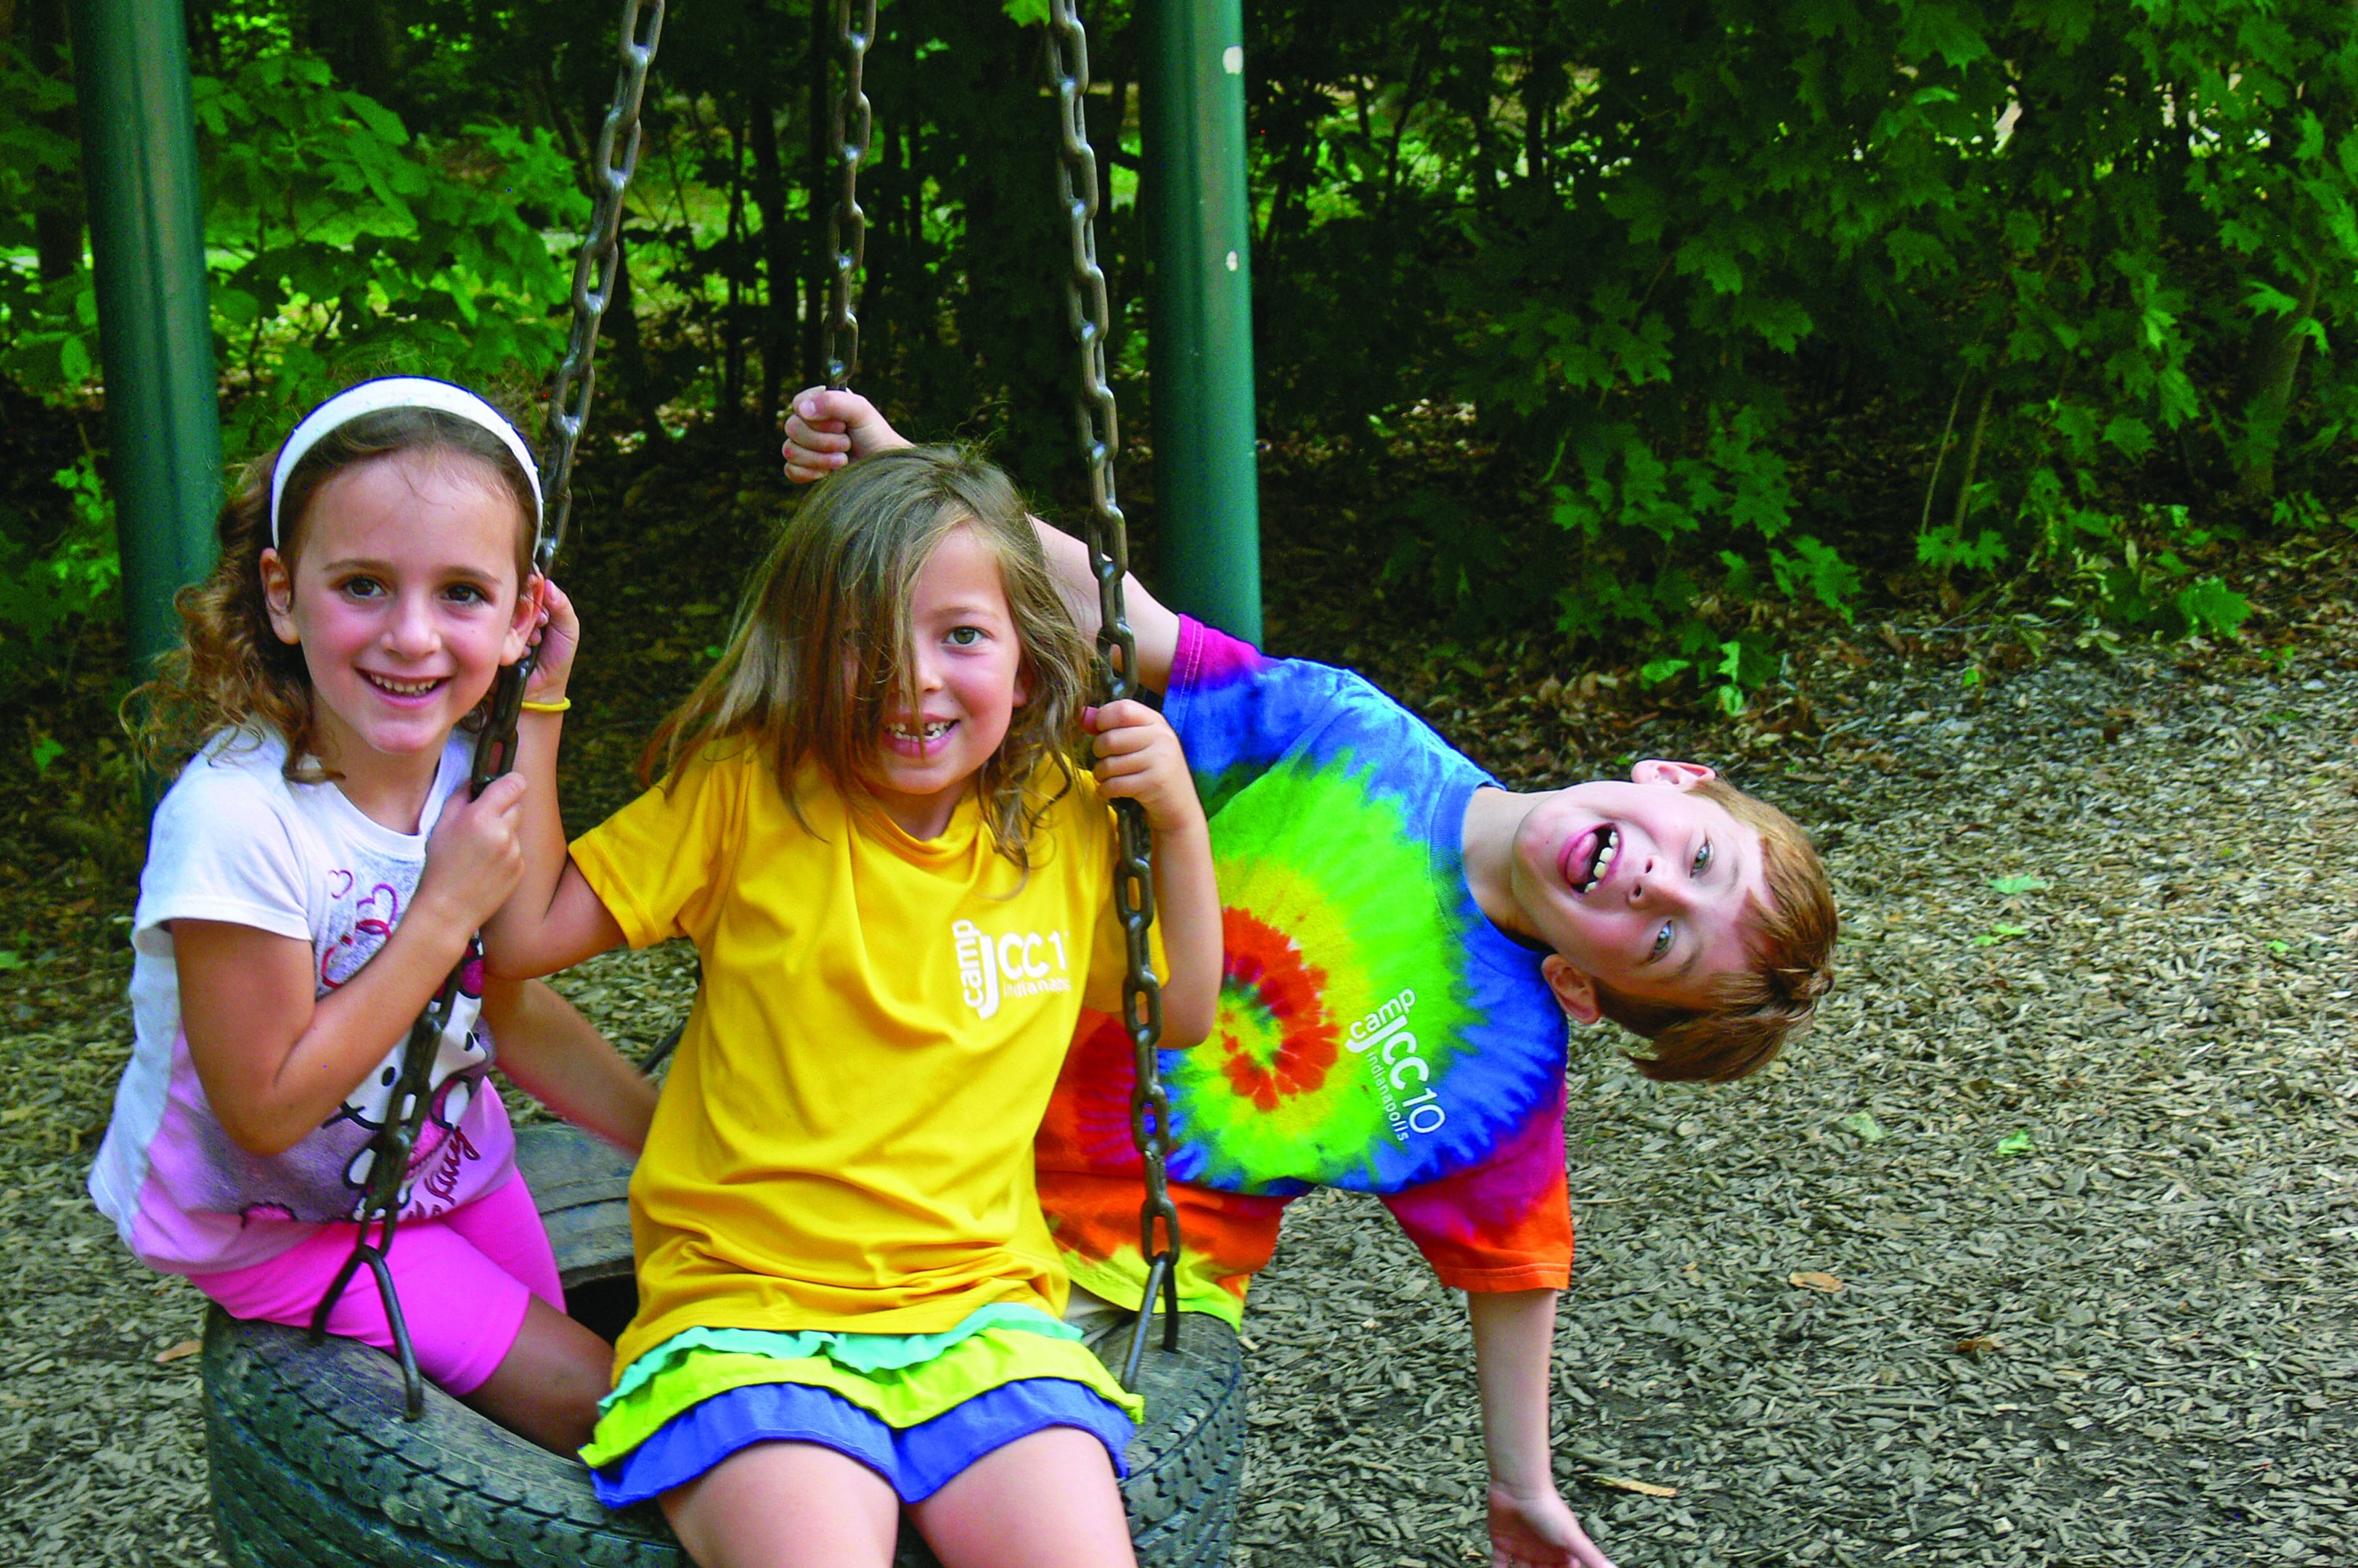 10 Tips for Choosing a Summer Camp